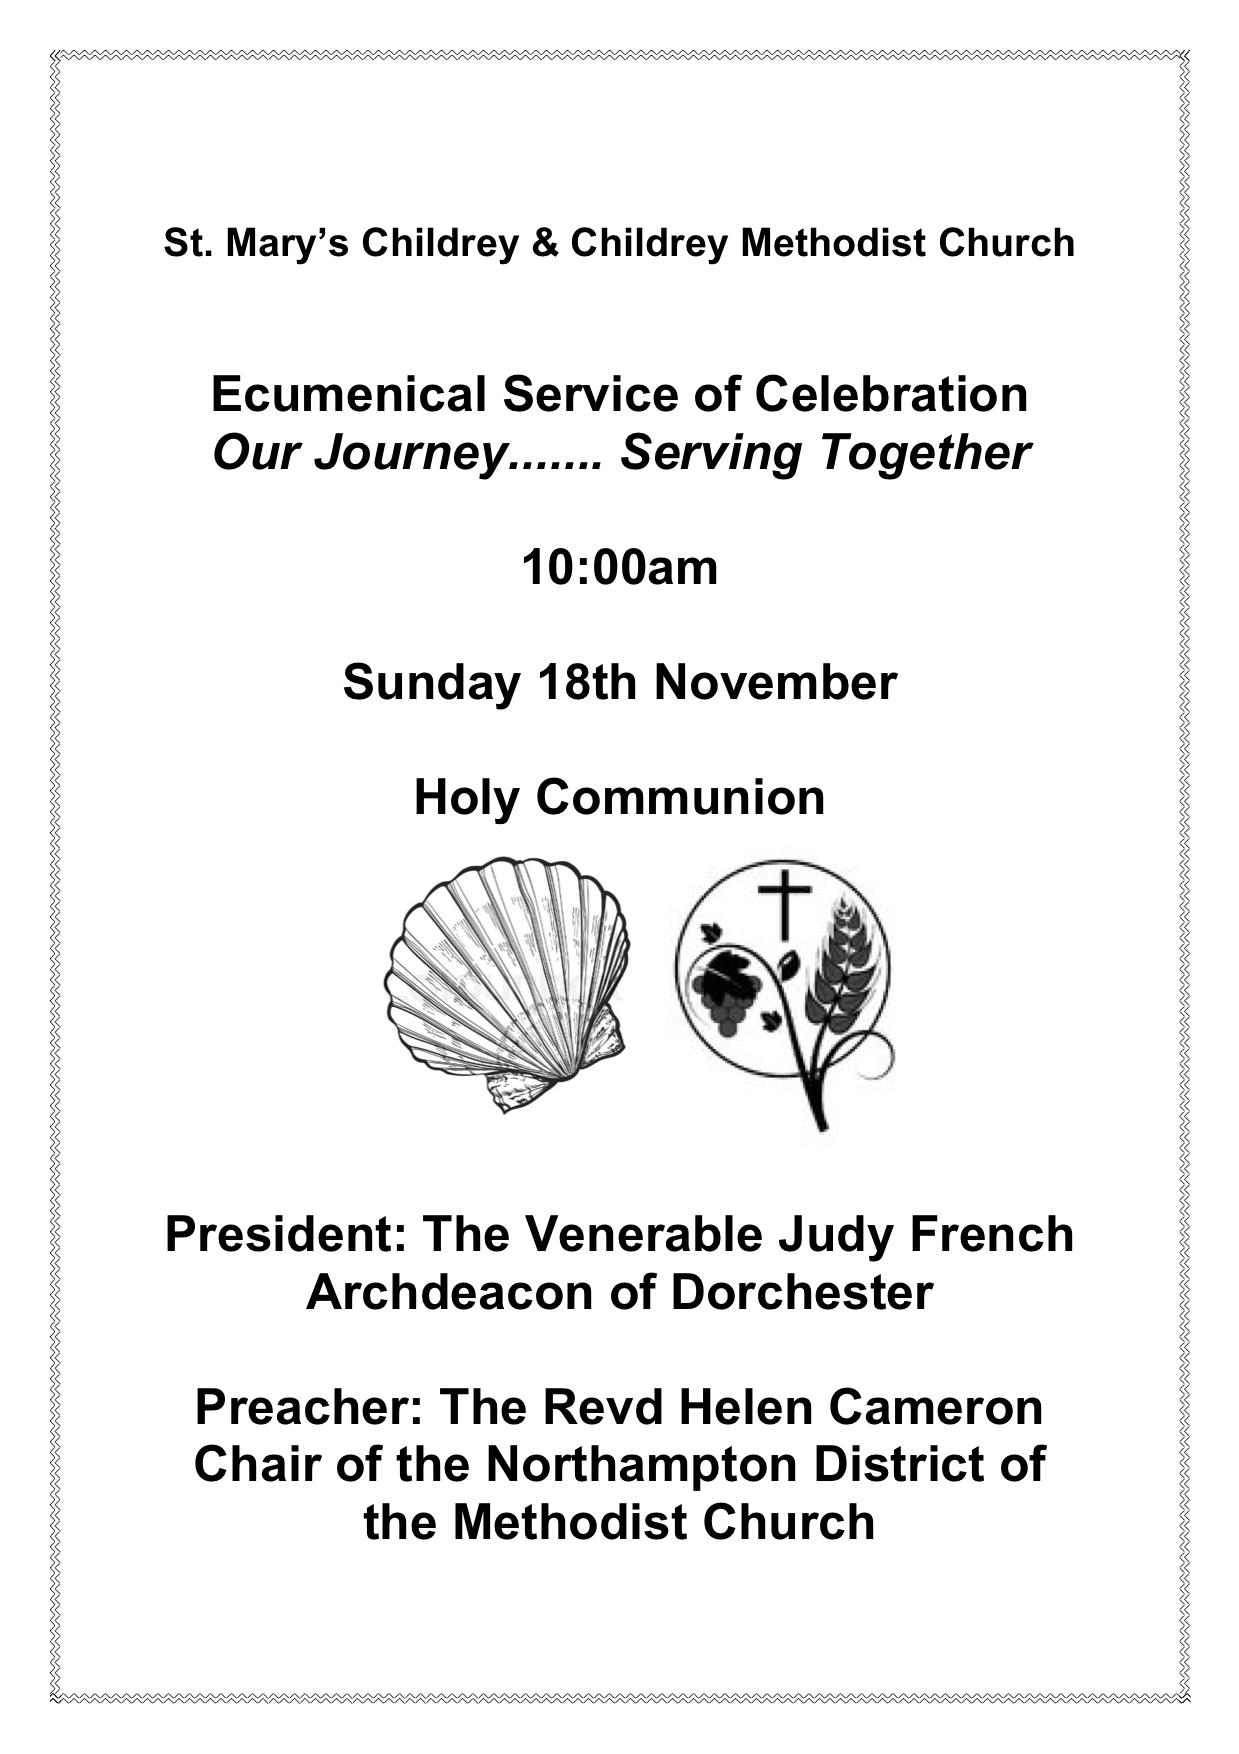 Poster for ecumenical service at S- Marys